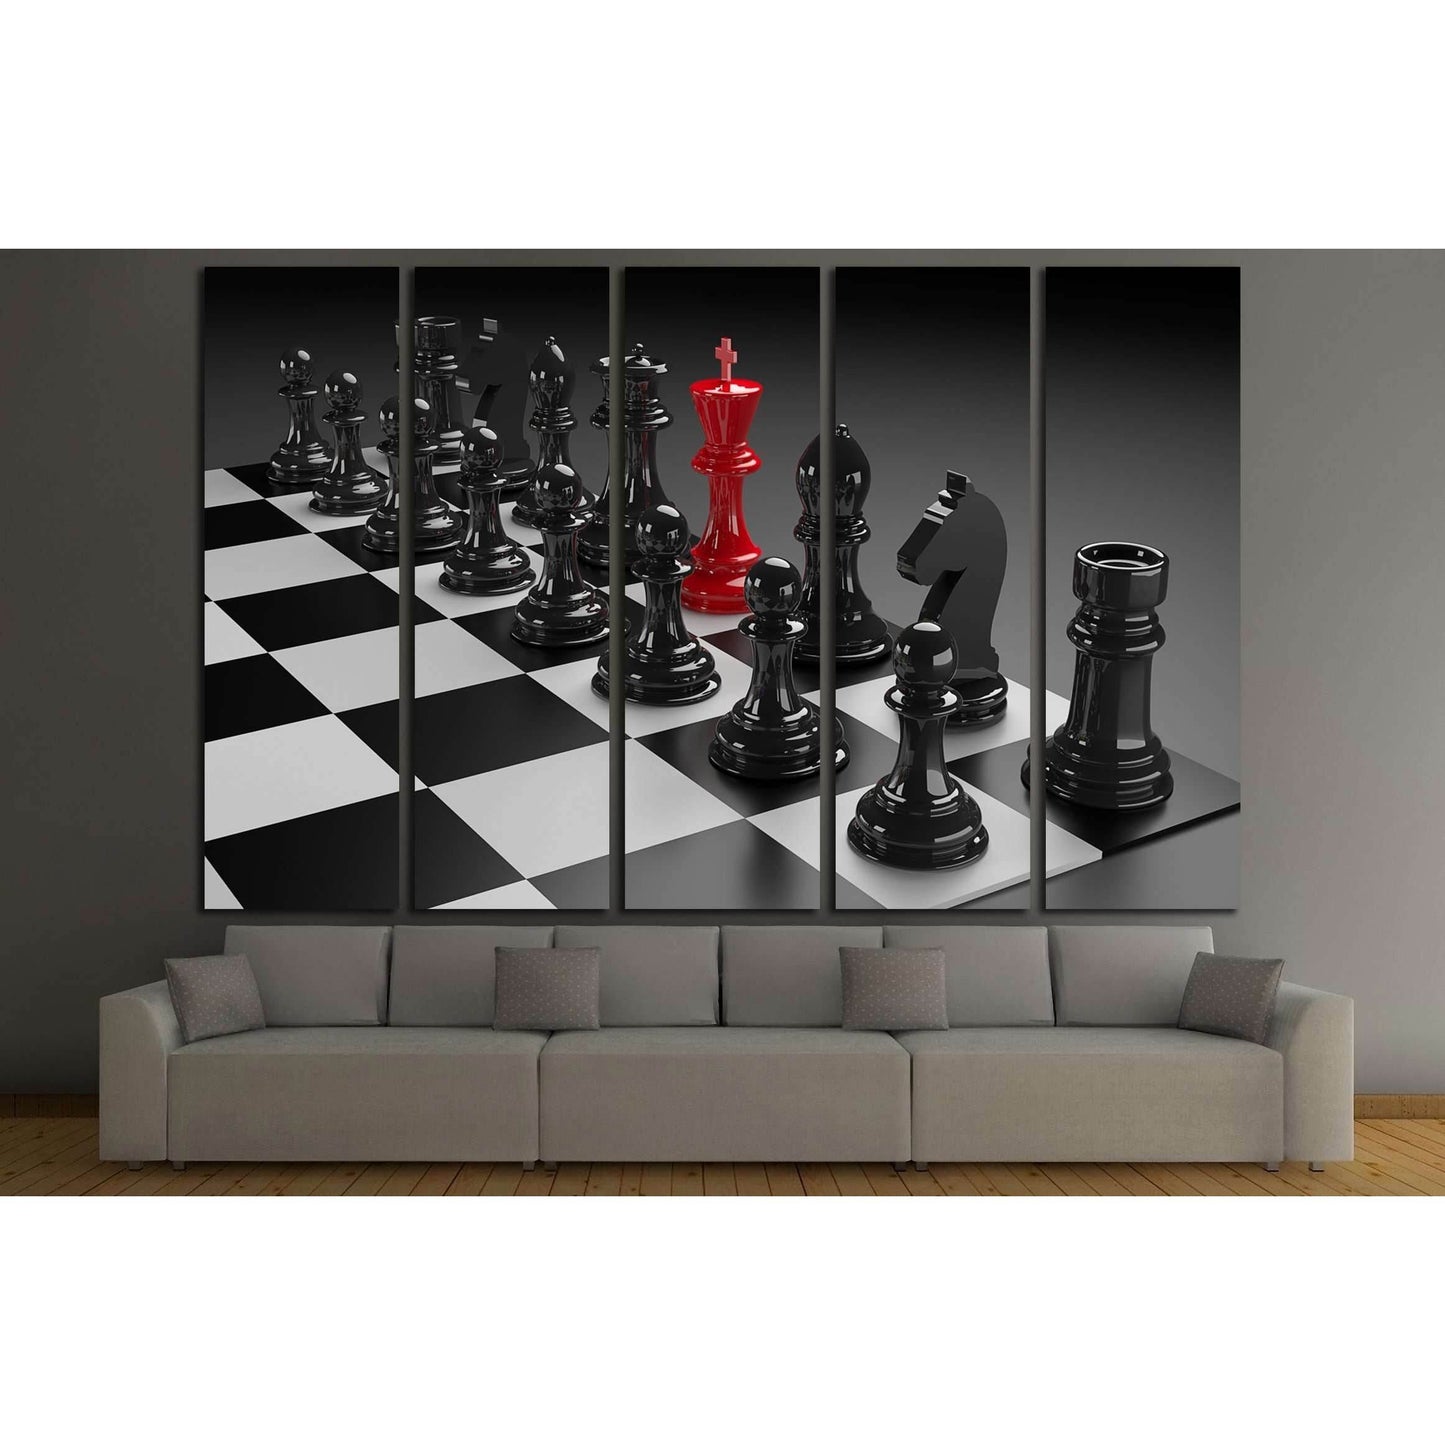 Chess board Canvas ArtworkDecorate your walls with a stunning Chess Canvas Art Print from the world's largest art gallery. Choose from thousands of Chess artworks with various sizing options. Choose your perfect art print to complete your home decoration